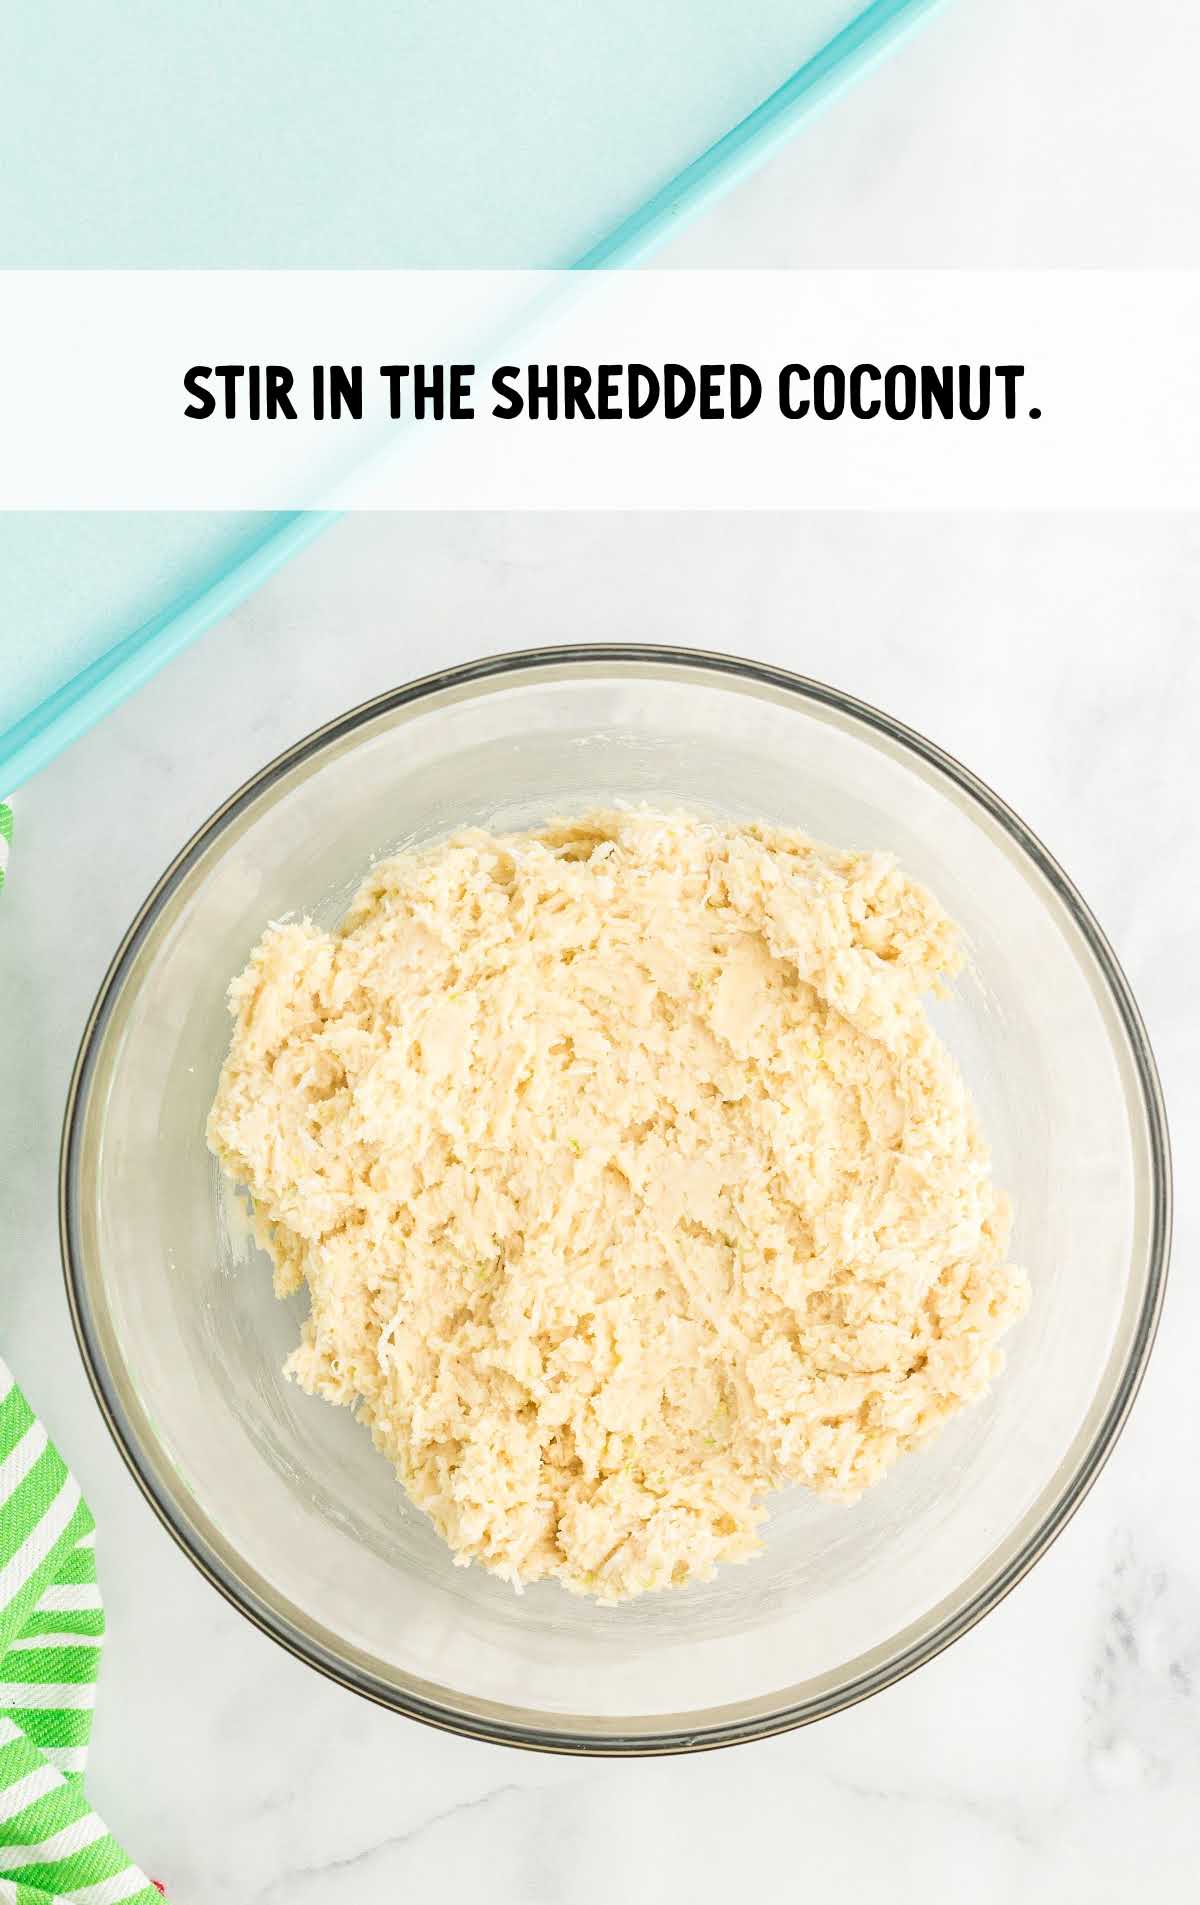 shredded coconut placed in the ingredients in a bowl